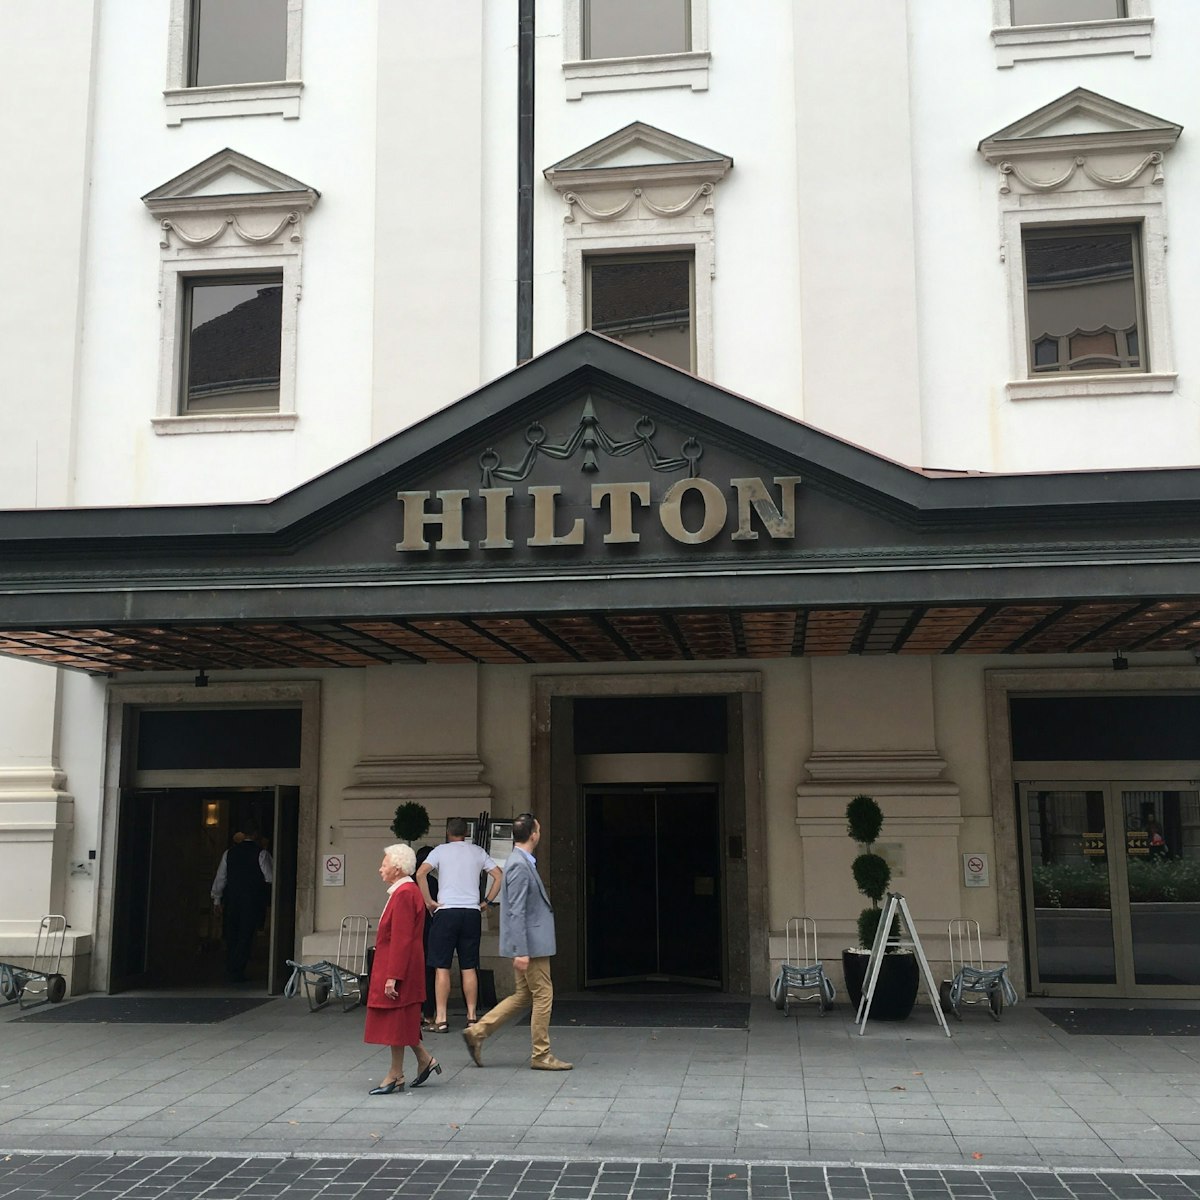 The Hilton Hotel on Castle Hill